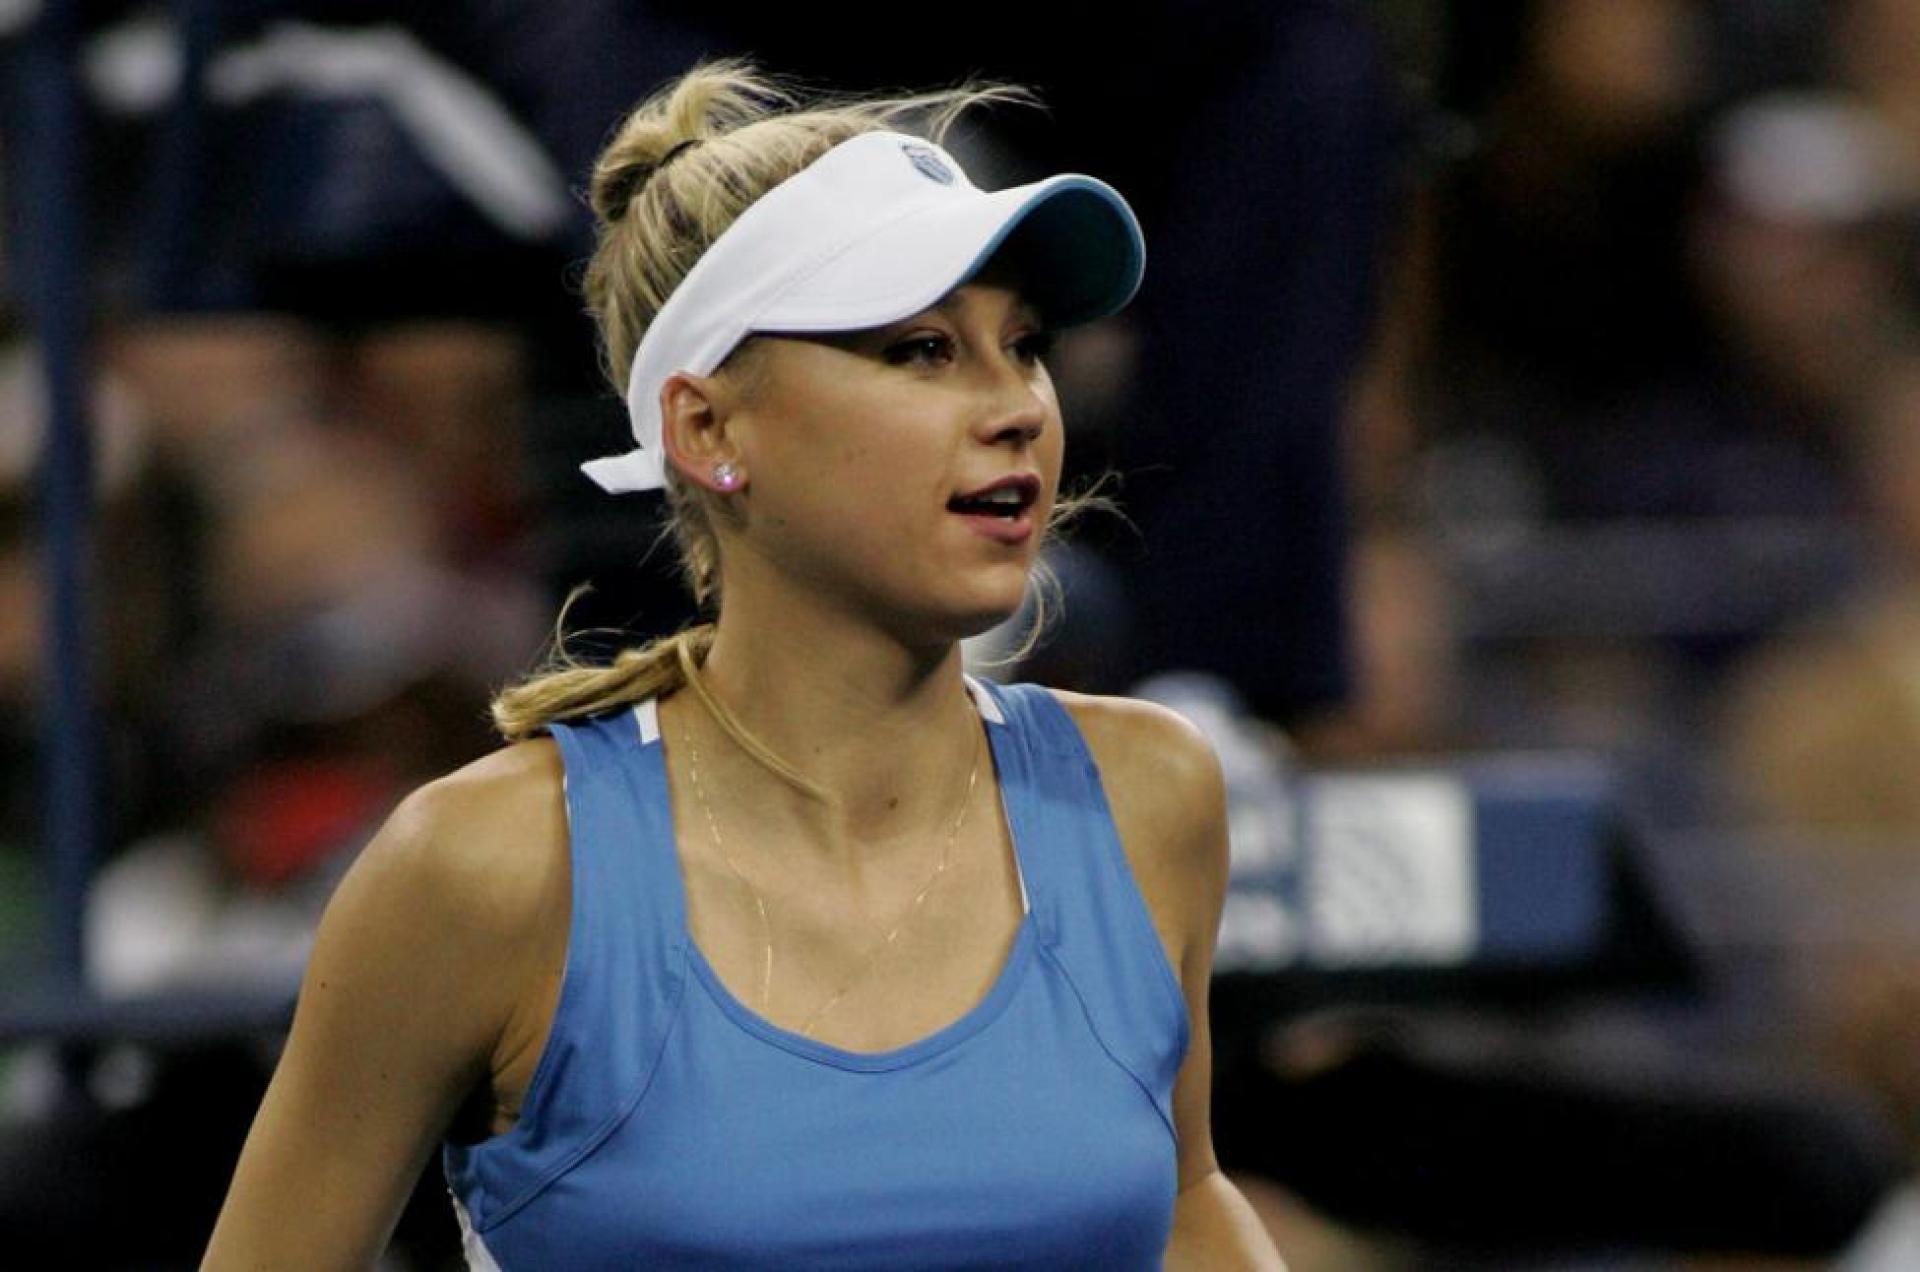 A blonde woman wearing a blue shirt and a white cap